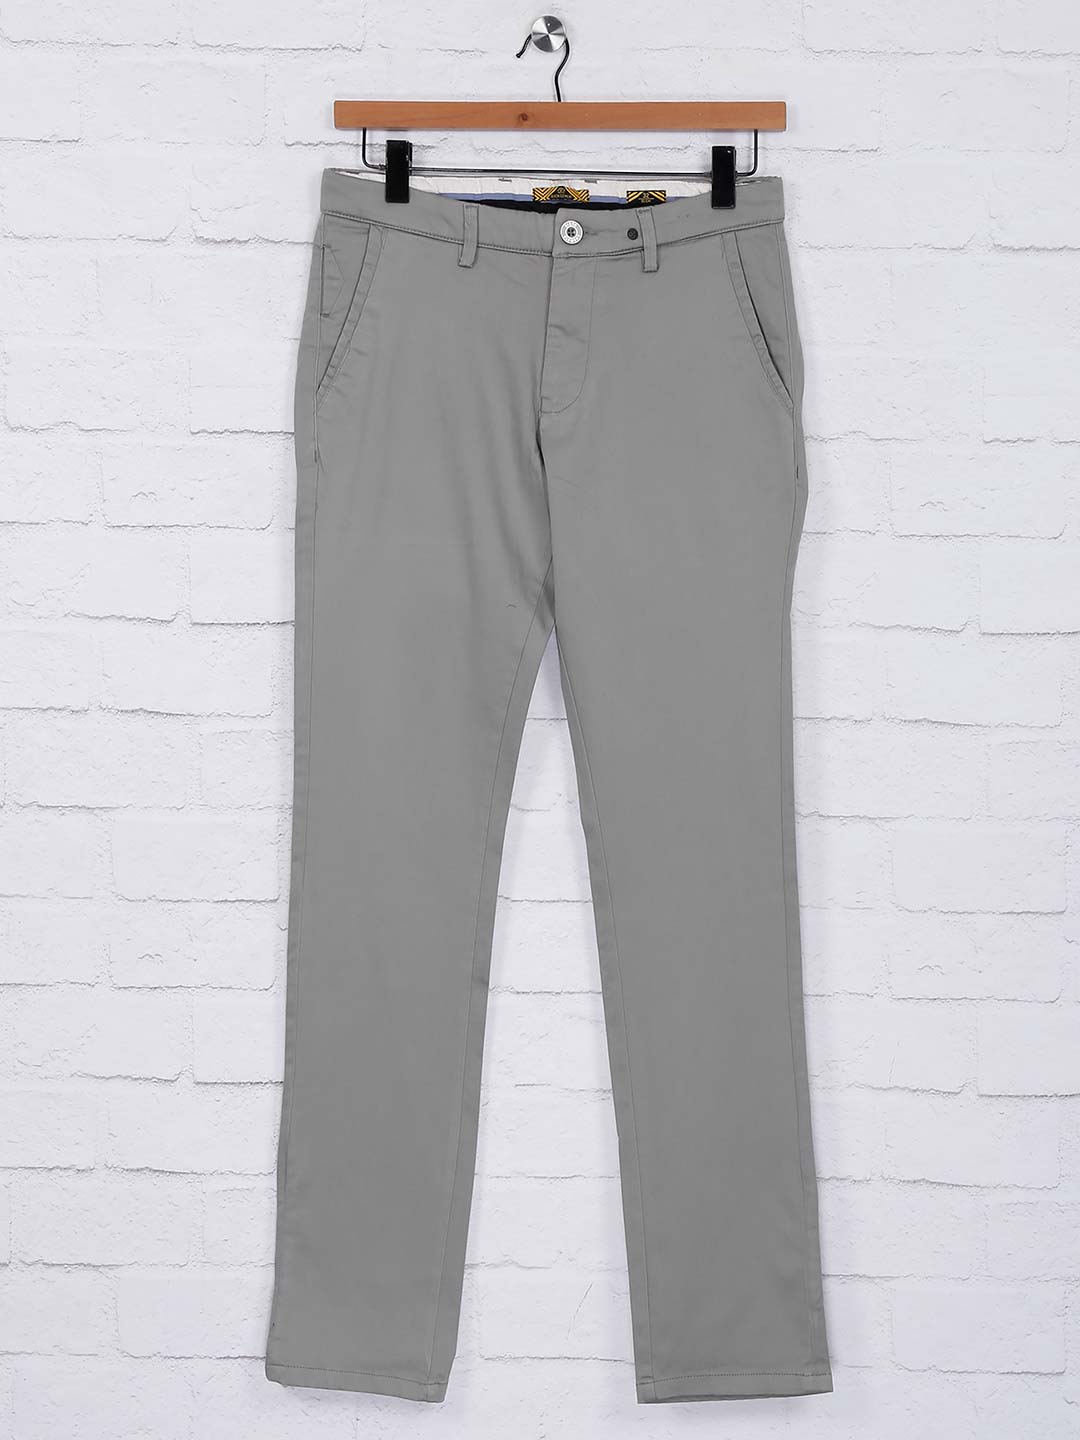 Buy Regular Trouser Pants Gray Beige and Bottle Green Combo of 3 Cotton for  Best Price, Reviews, Free Shipping